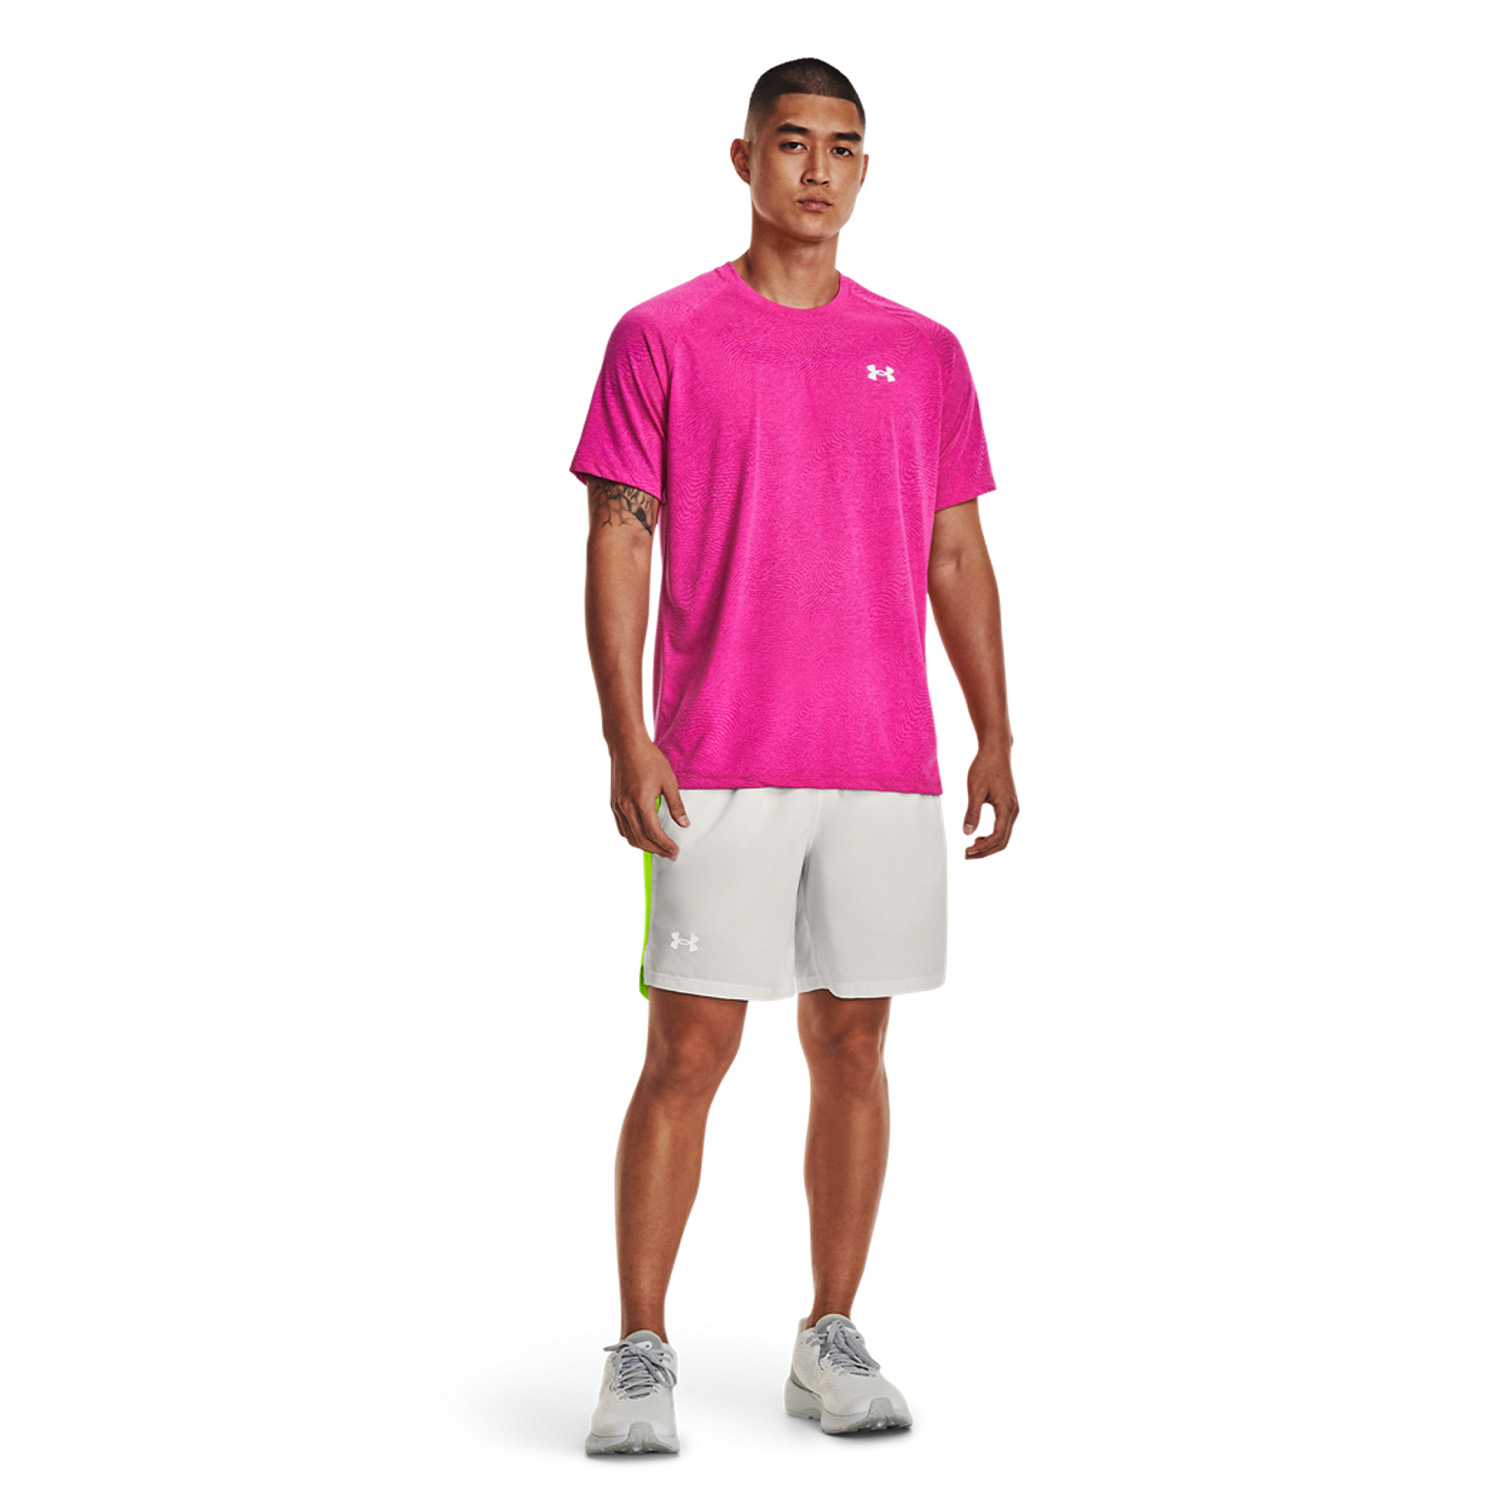 Under Armour Launch 7in Shorts - Gray Mist/Lime Surge